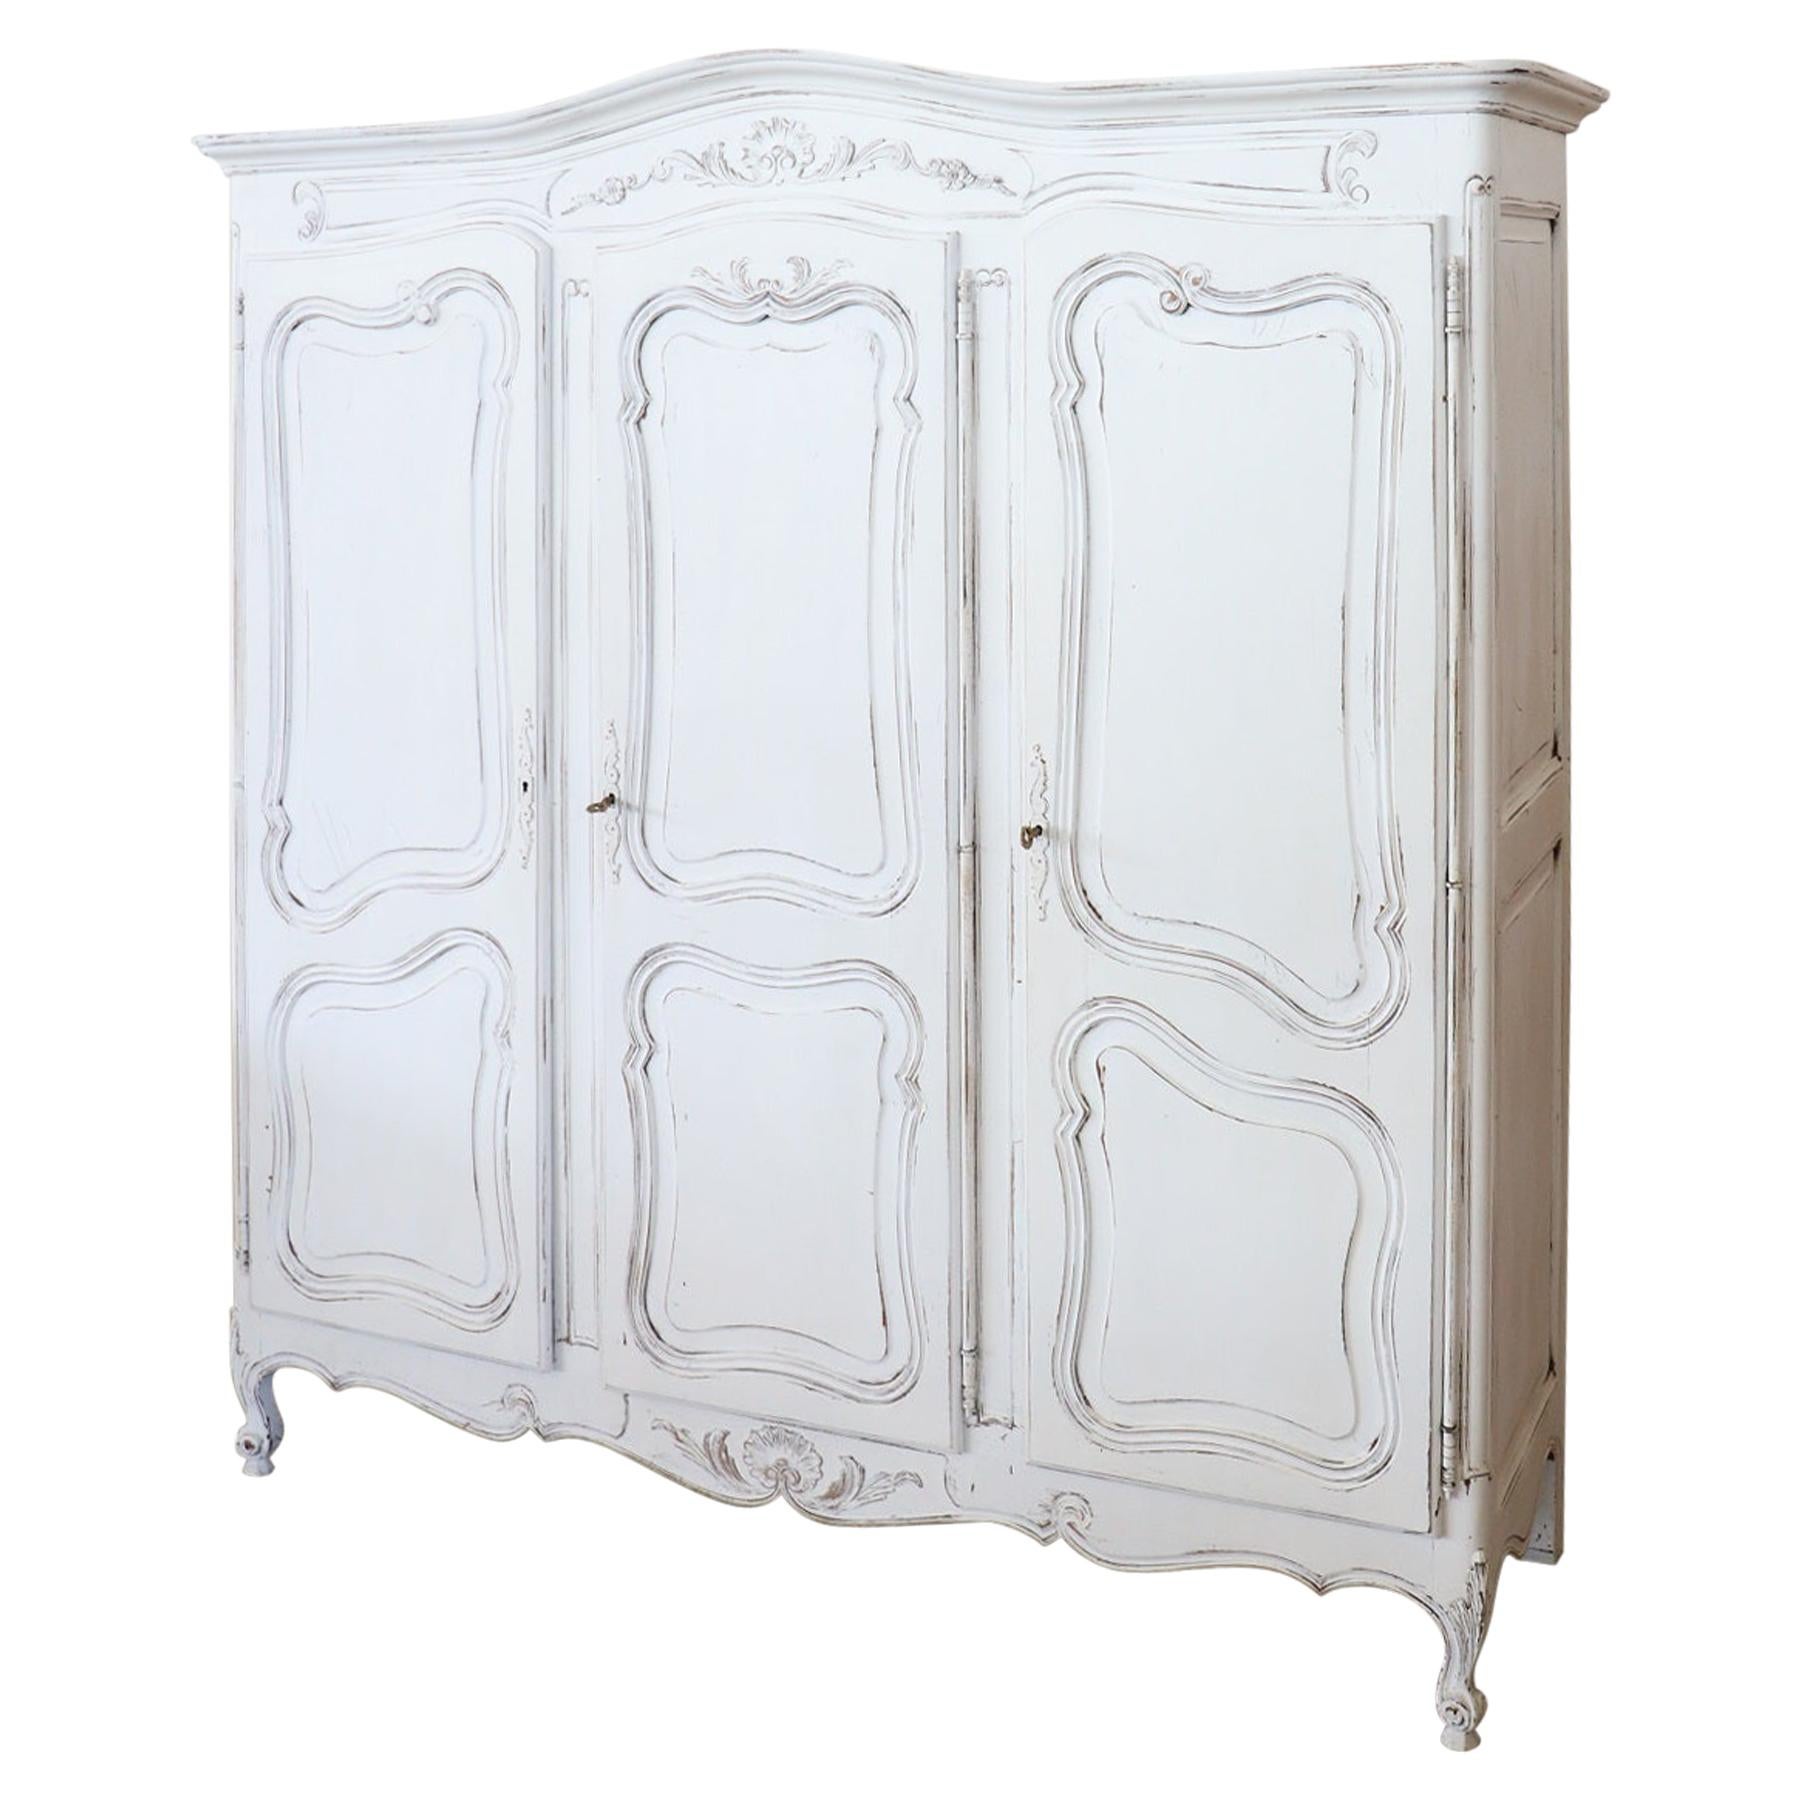 20th Century Baroque Style White Lacquered Wood Wardrobe or Armoire